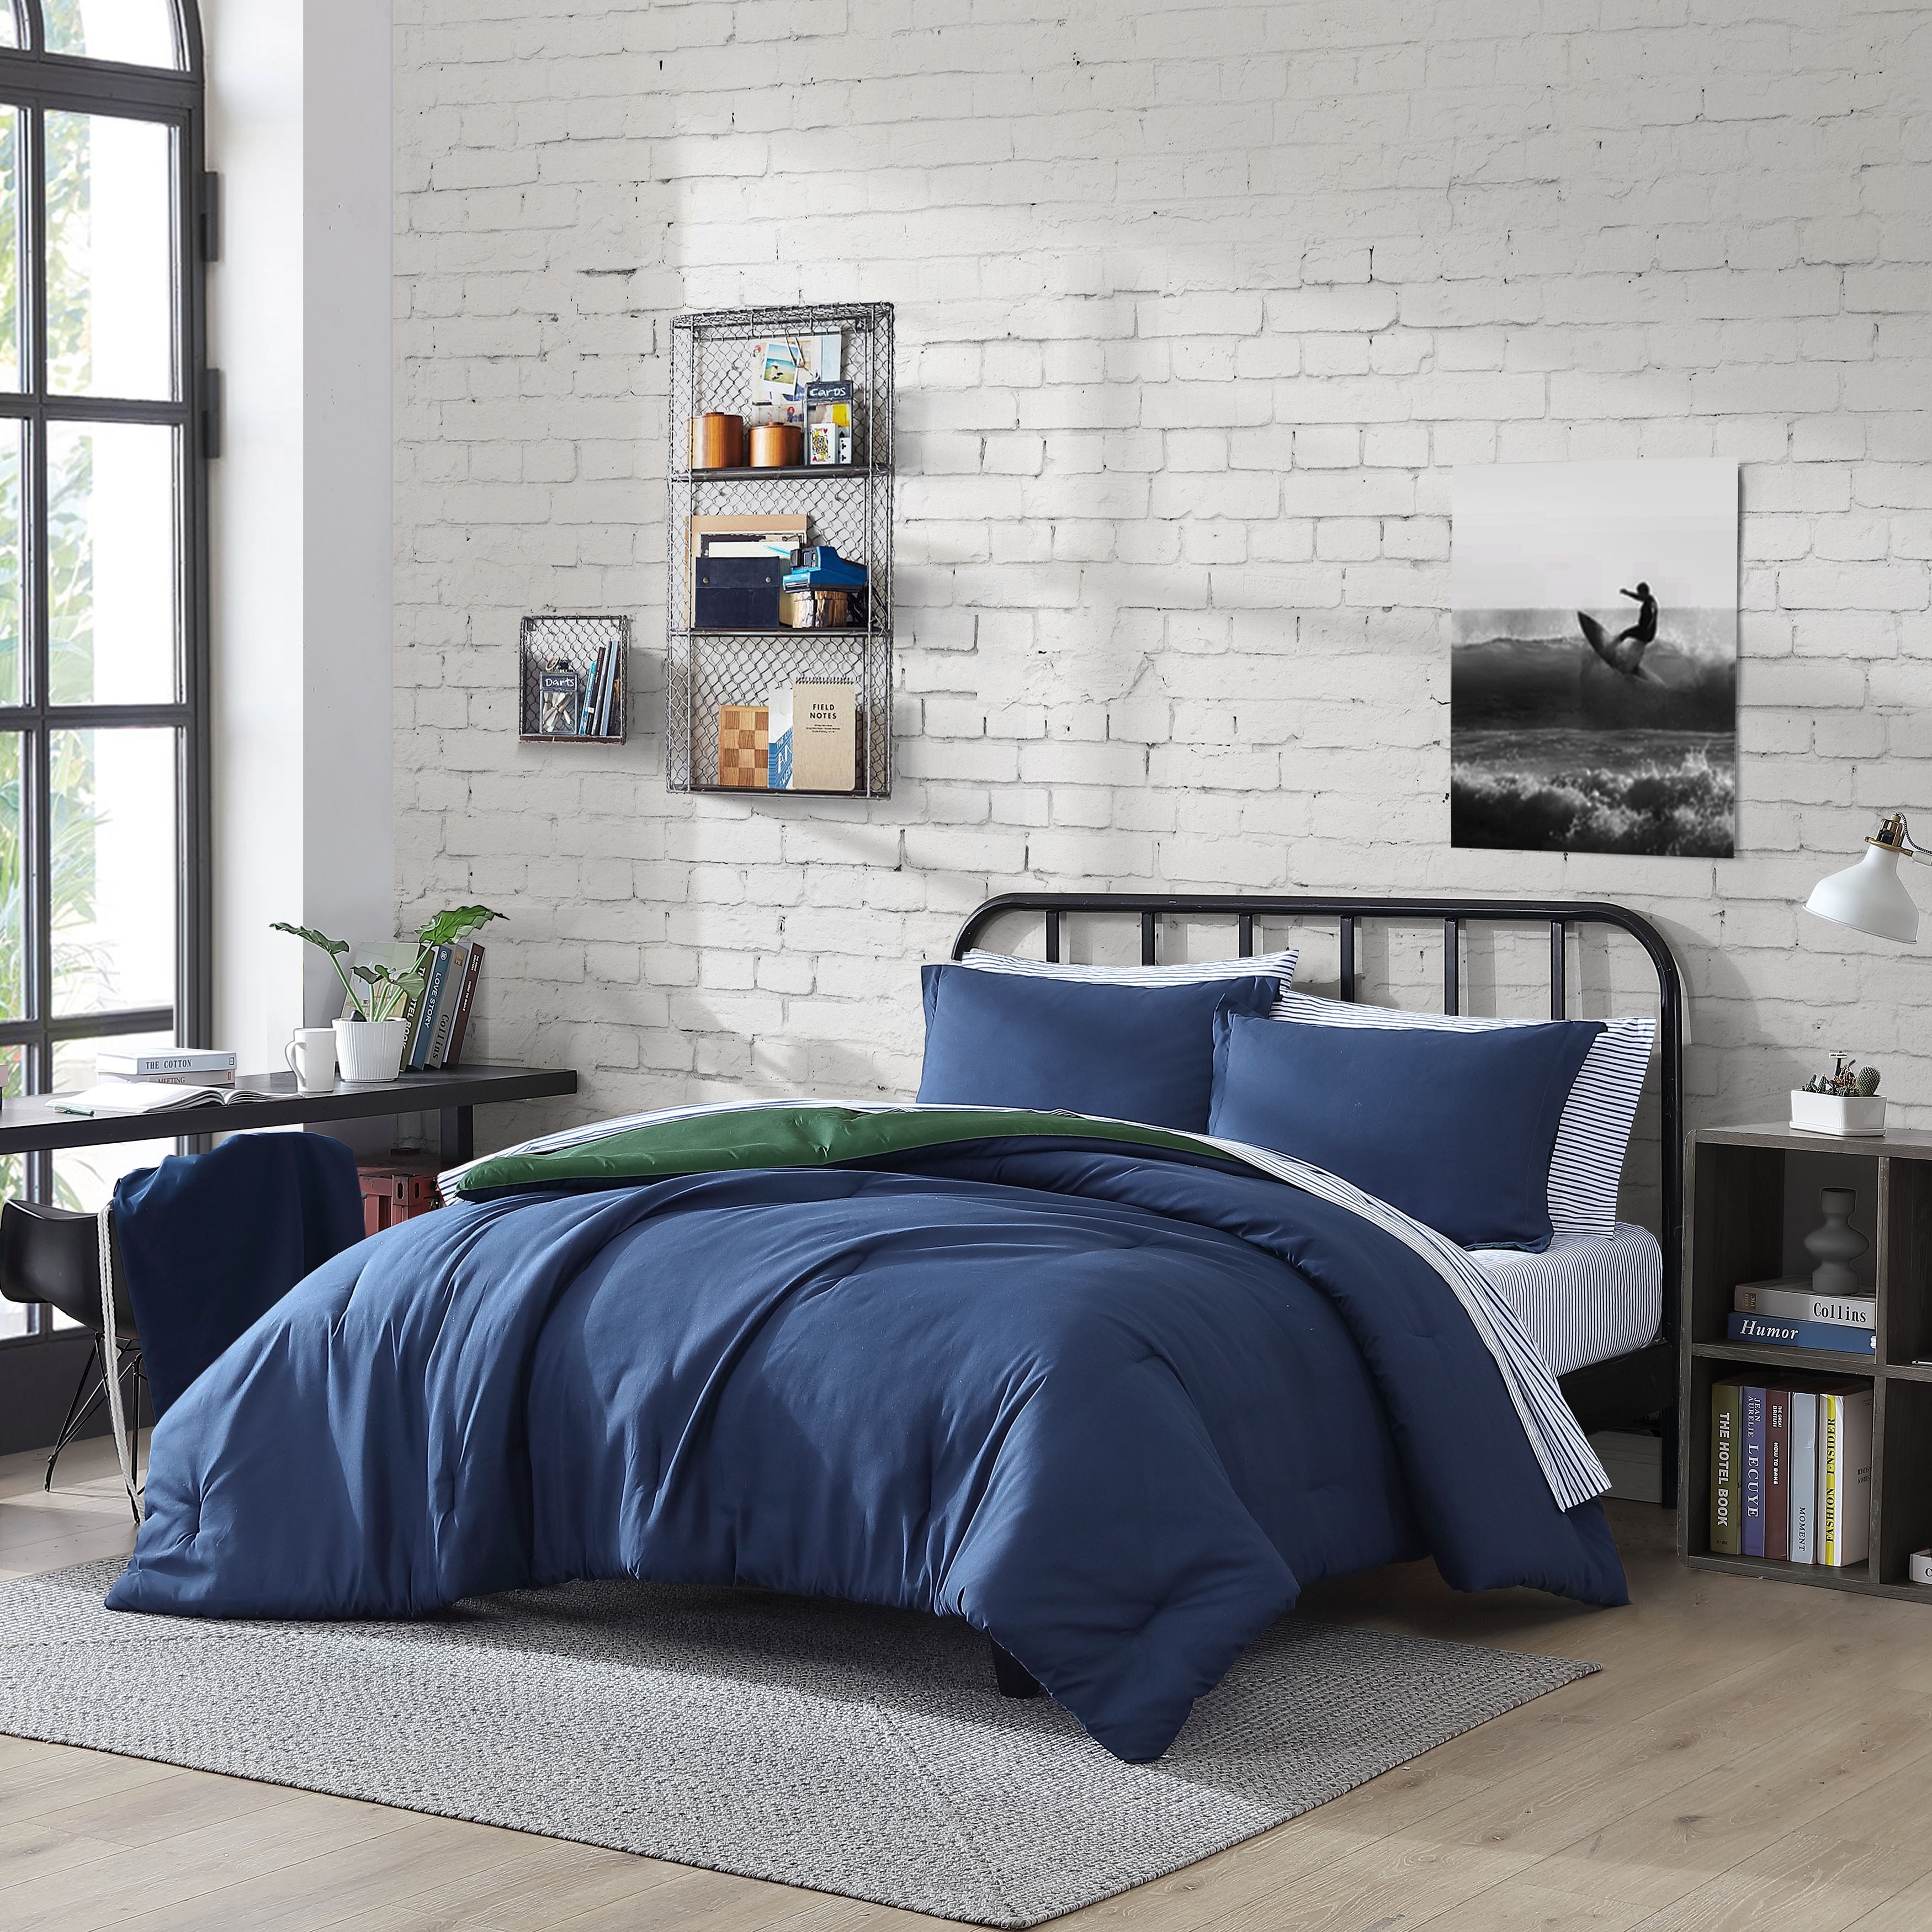 Queen Size Top Rated Nautica Bedding - Bed Bath & Beyond